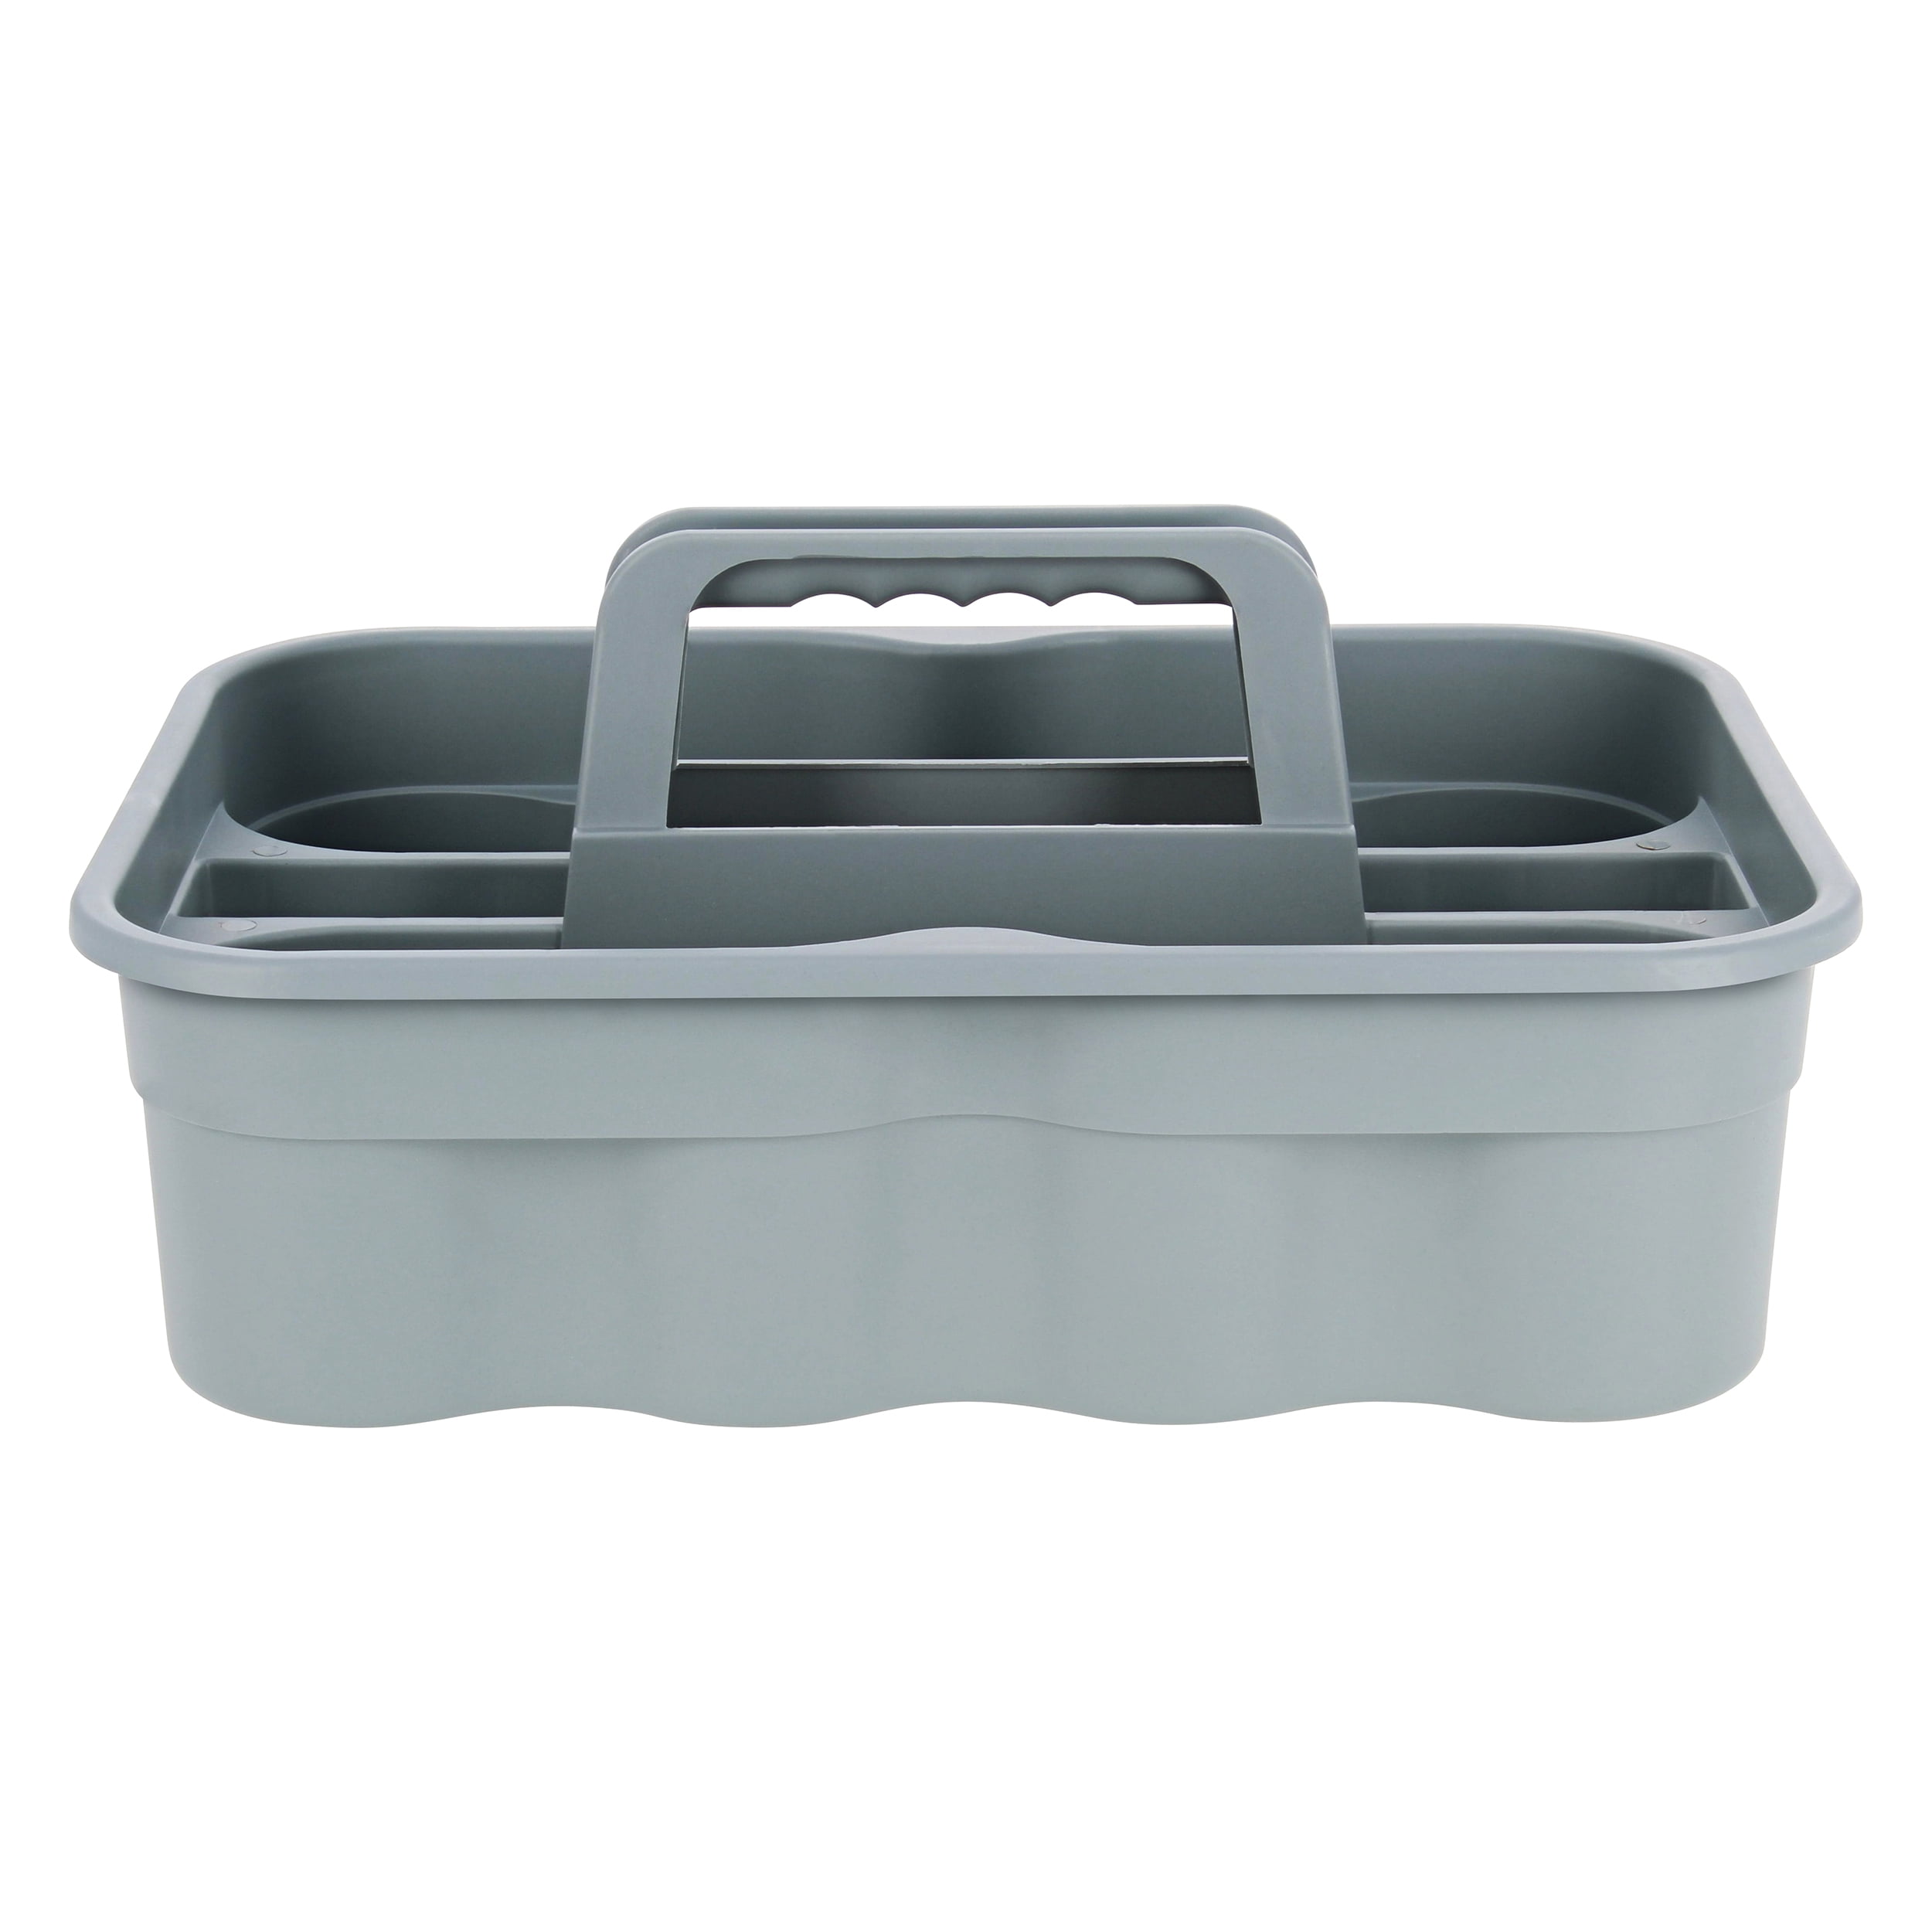 RW Clean Black Plastic Cleaning Caddy - 2 Compartments, with Handle - 15 1/4 inch x 13 1/4 inch x 6 3/4 inch - 1 Count Box